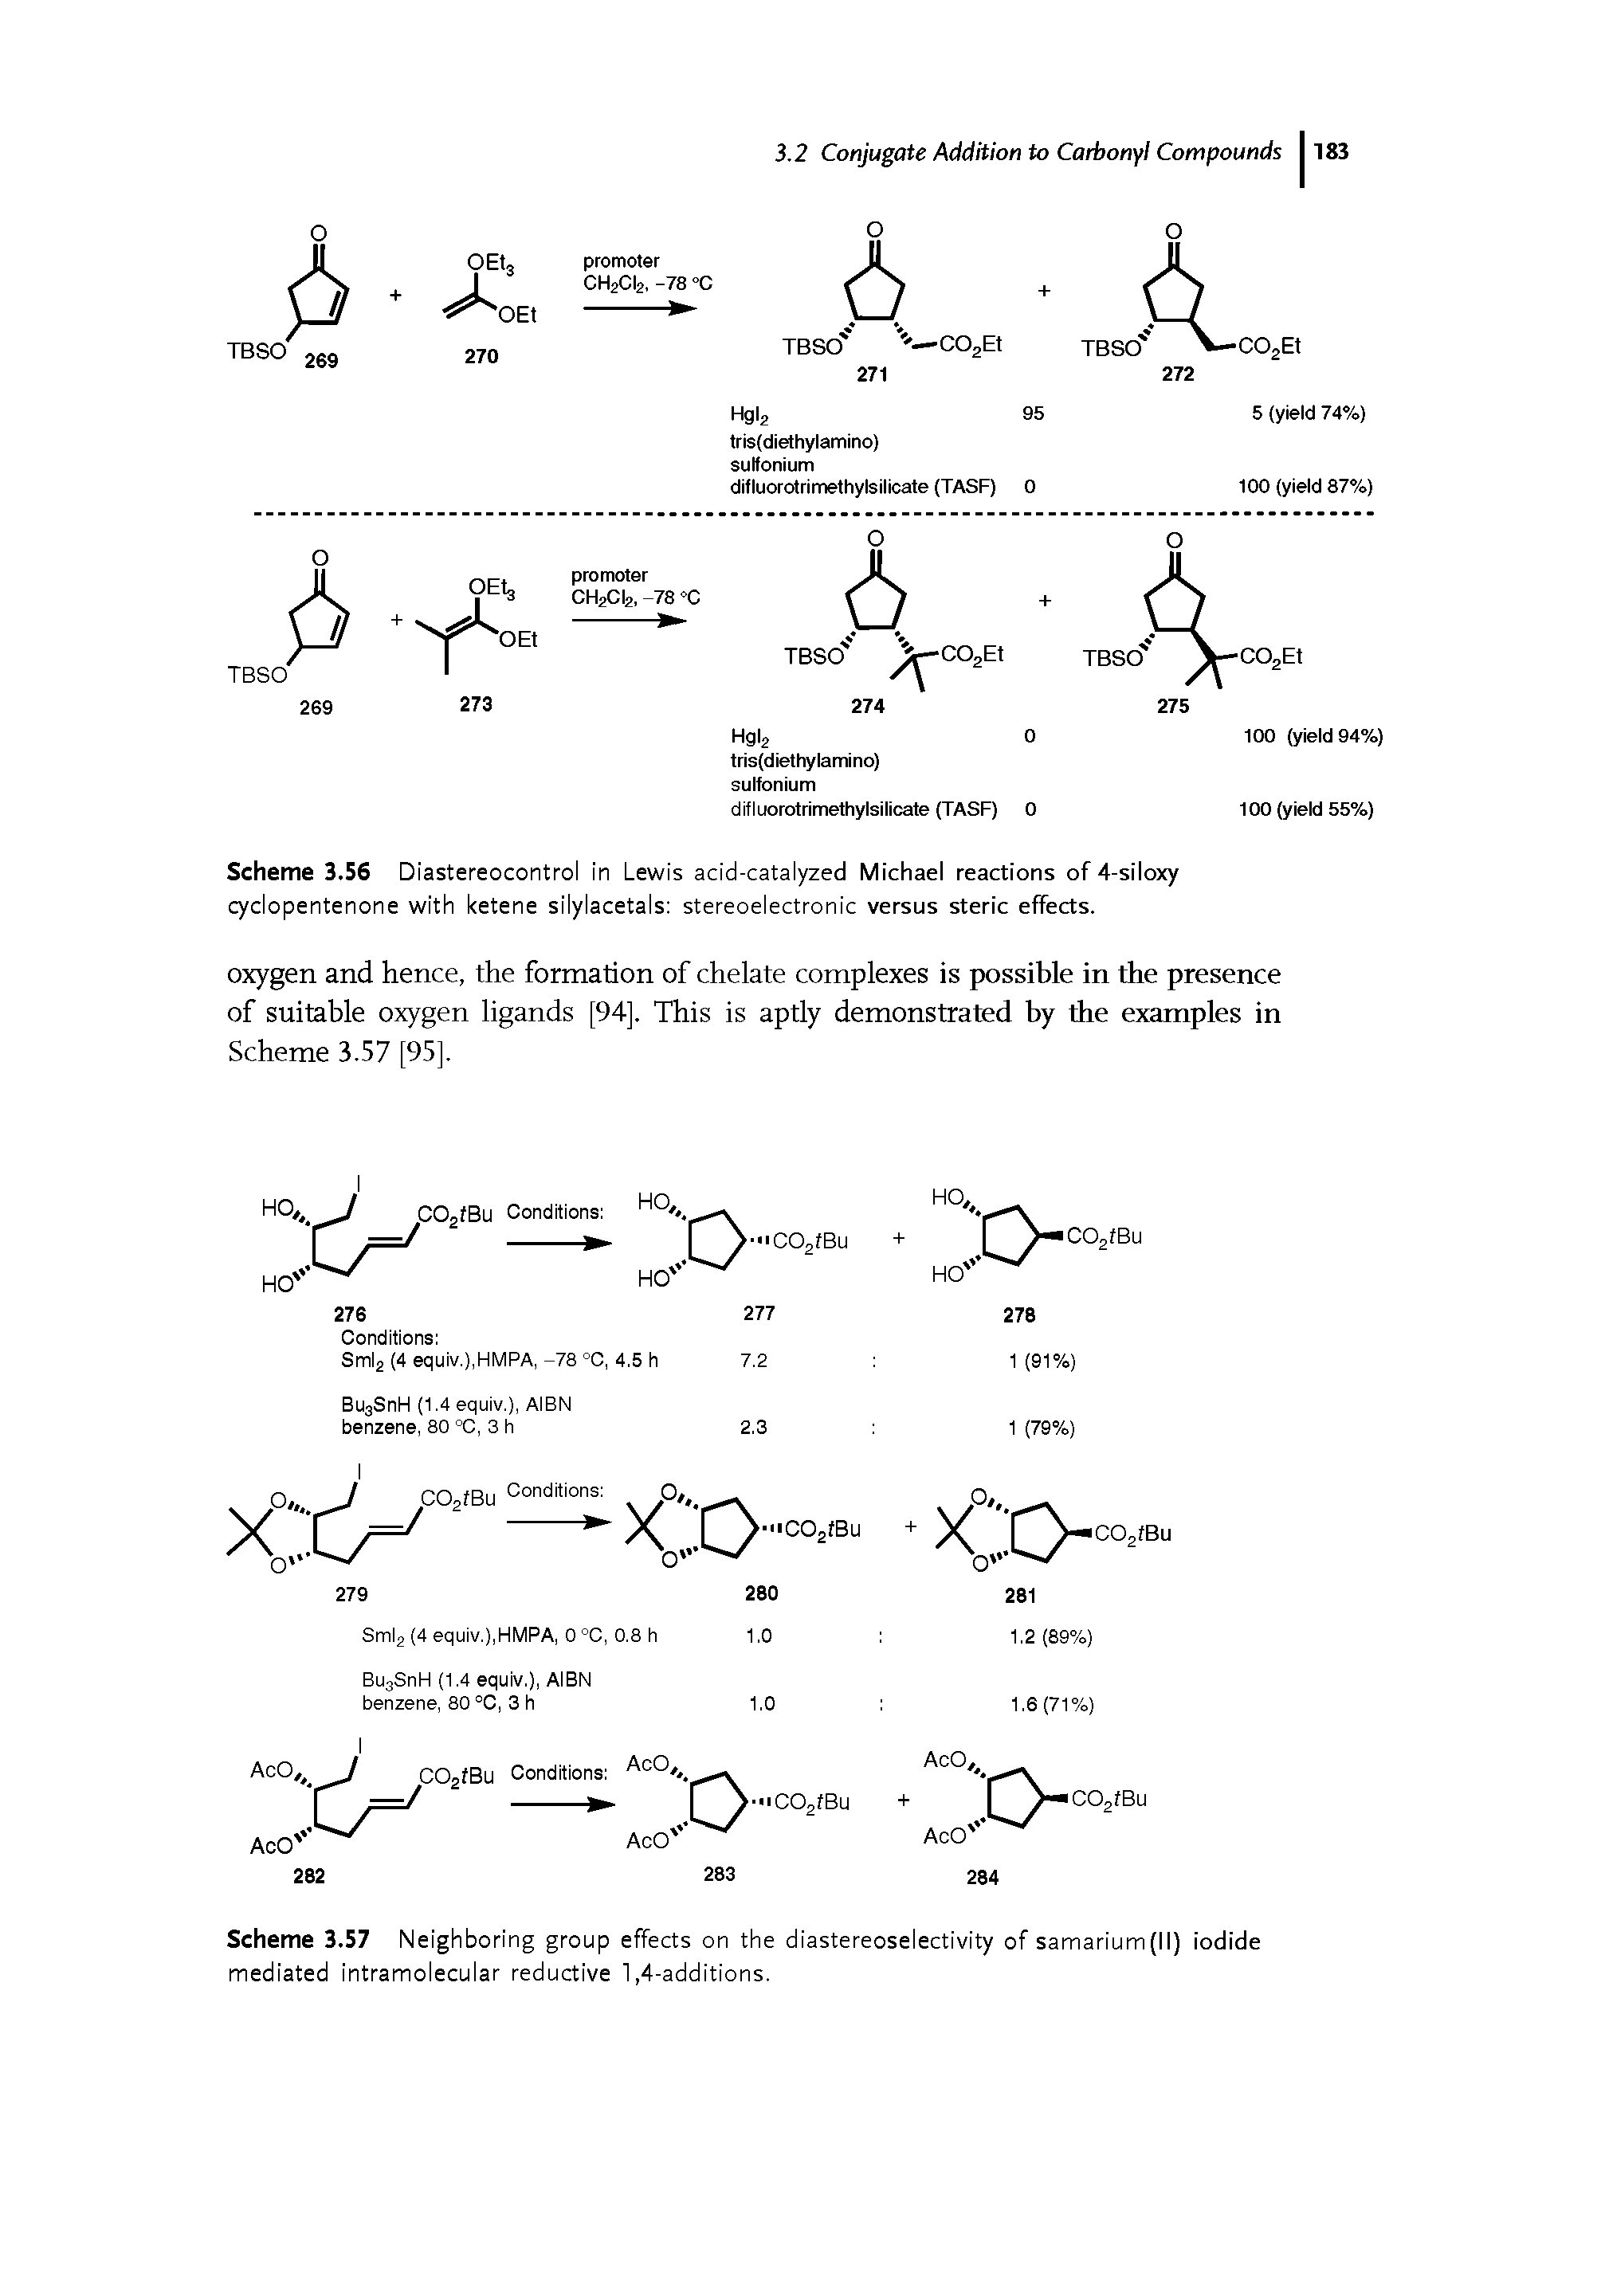 Scheme 3.56 Diastereocontrol in Lewis acid-catalyzed Michael reactions of 4-siloxy cyclopentenone with ketene silylacetals stereoelectronic versus steric effects.